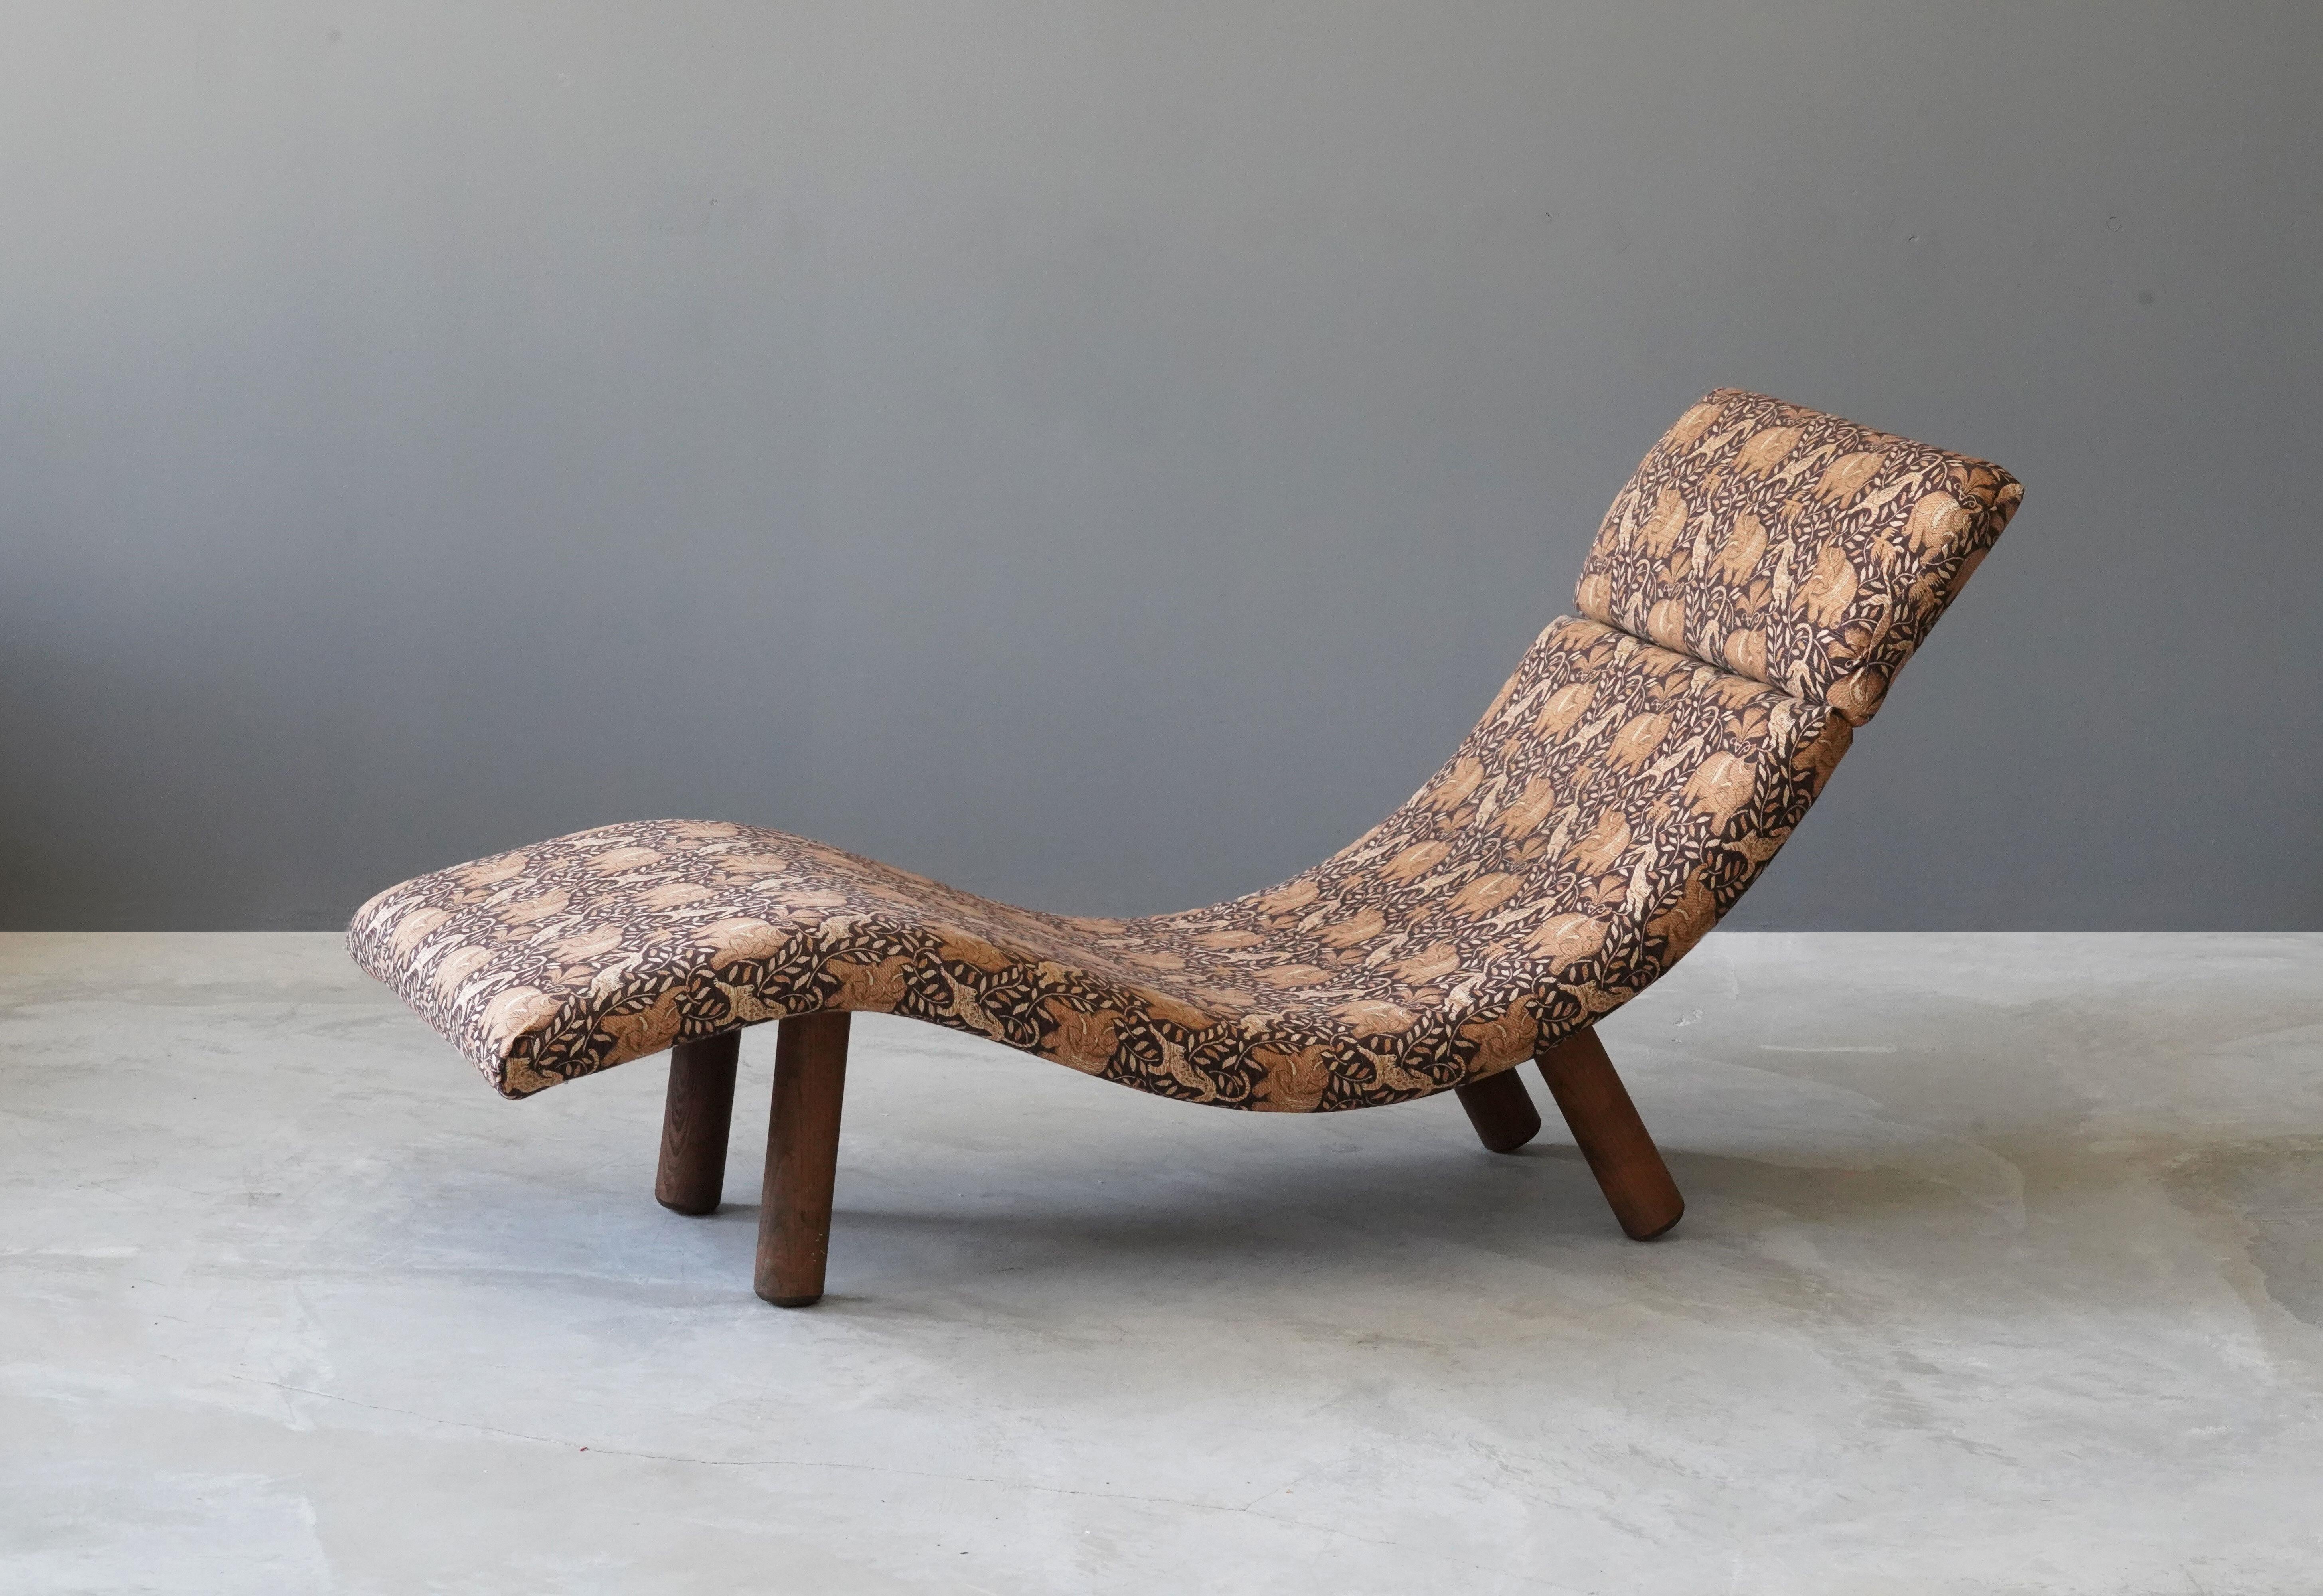 A chaise longue / daybed. Design and production attributed to Enrico Bartolini, USA, 1970s.

Features soft overstuffed forms paired with sculptural solid oak legs.

Other designers of the period include Philip Arctander, Arnold Madsen, Vladimir